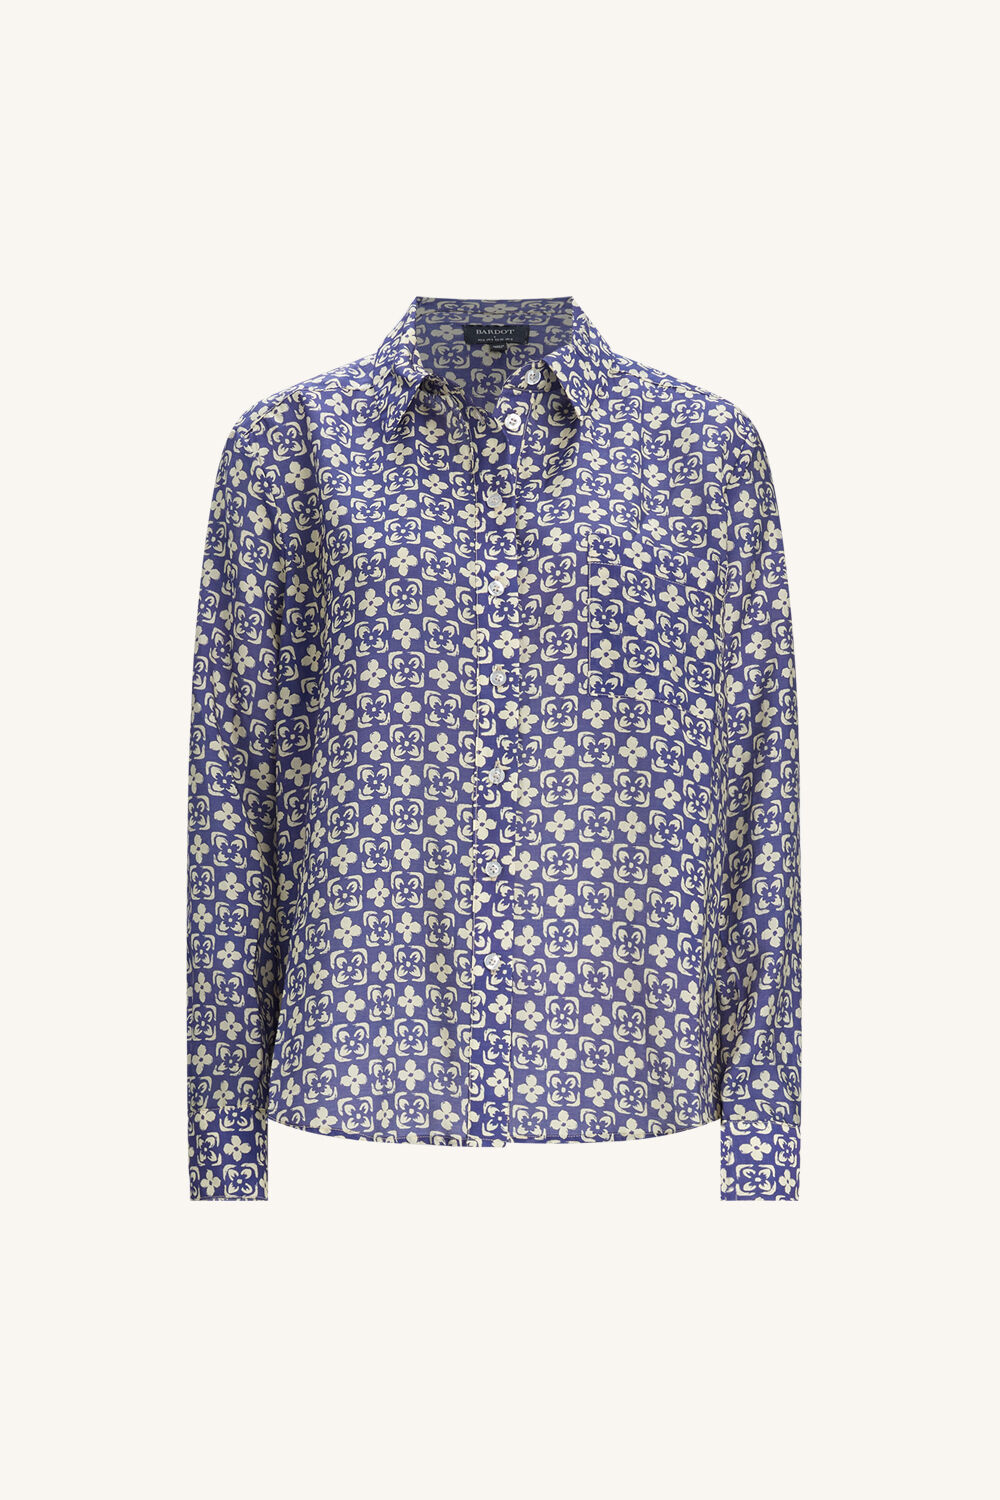 CLASSIC PRINTED COLLAR SHIRT in colour DRESS BLUES